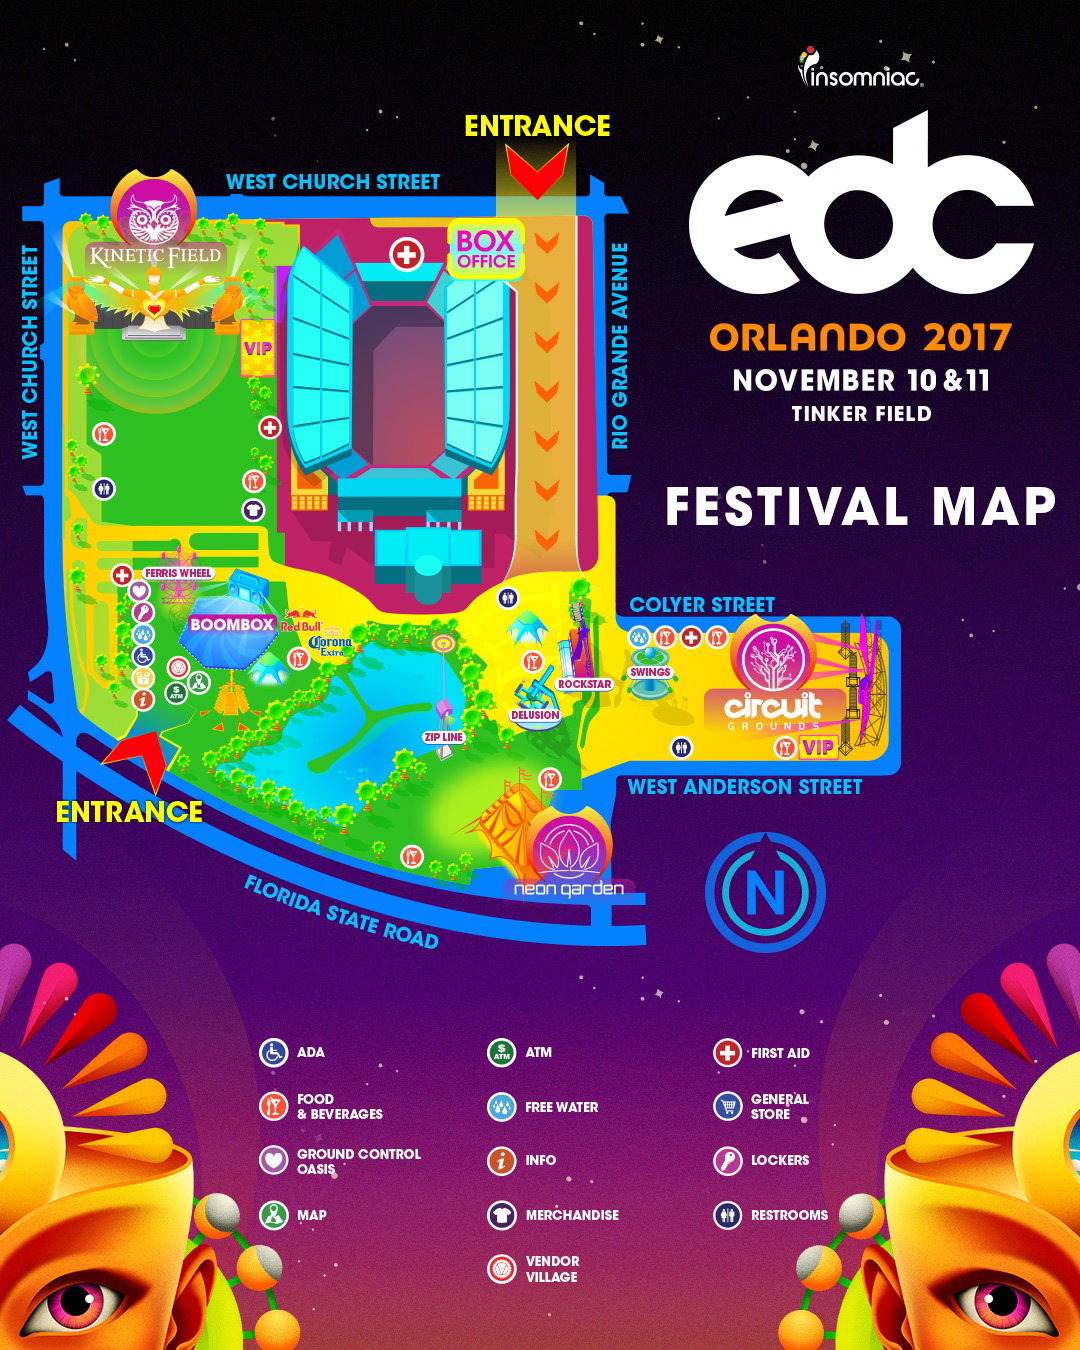 EDC Orlando reveals map with new and expanded festival layout